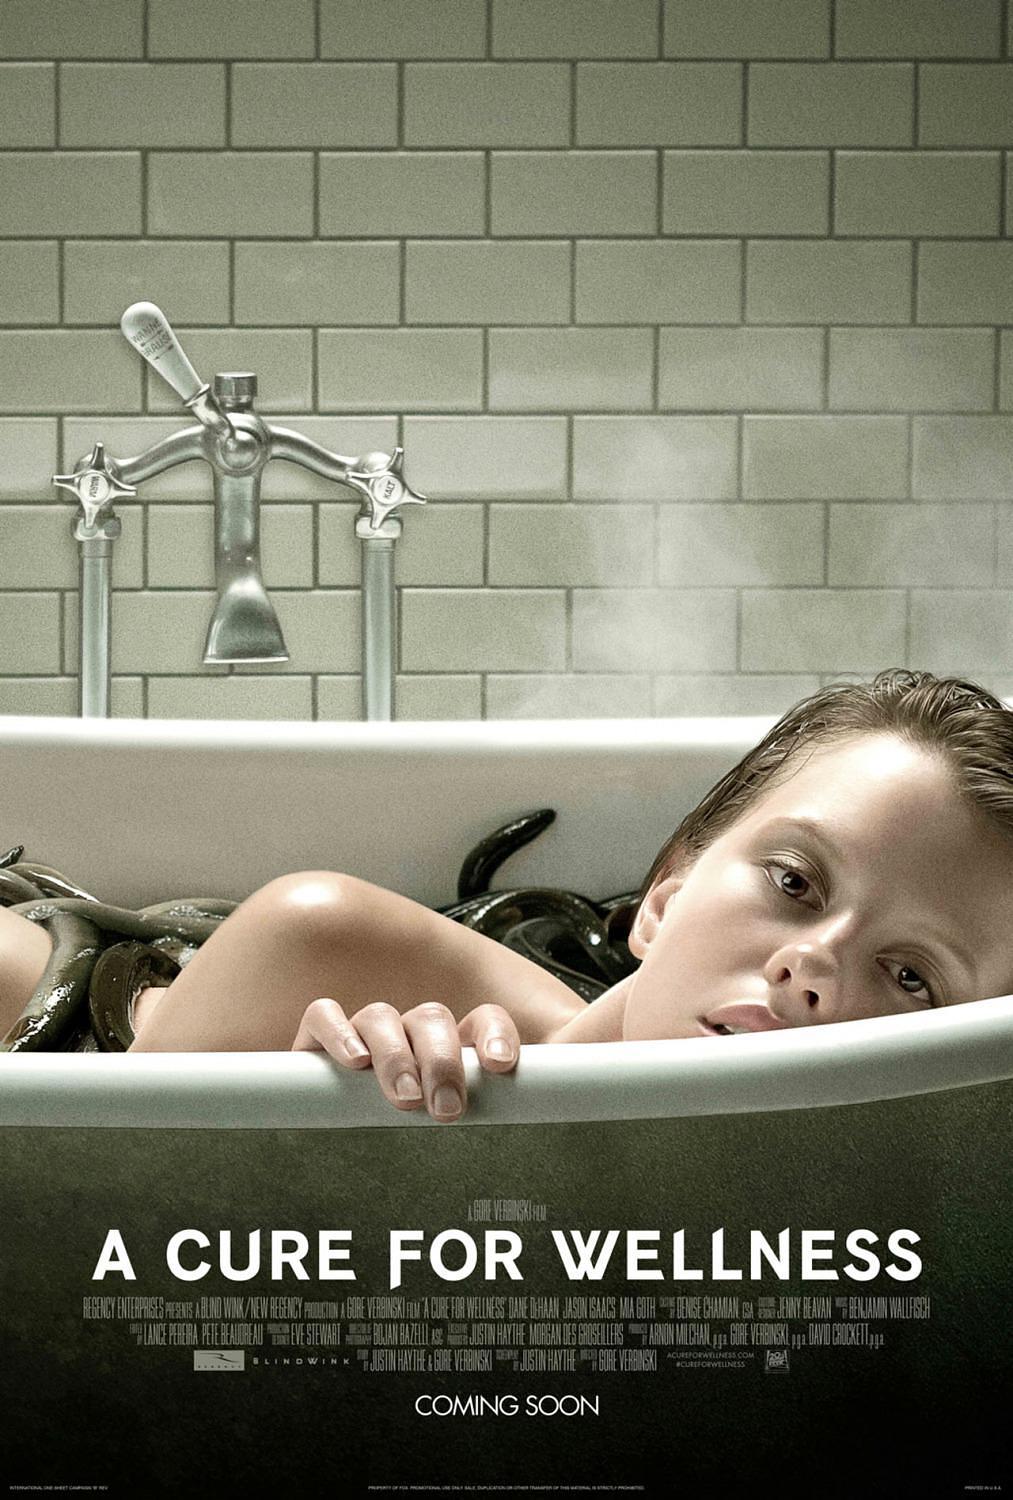 ҩ/ A.Cure.for.Wellness.2016.1080p.BluRay.x264-DRONES 11.08GB-1.png